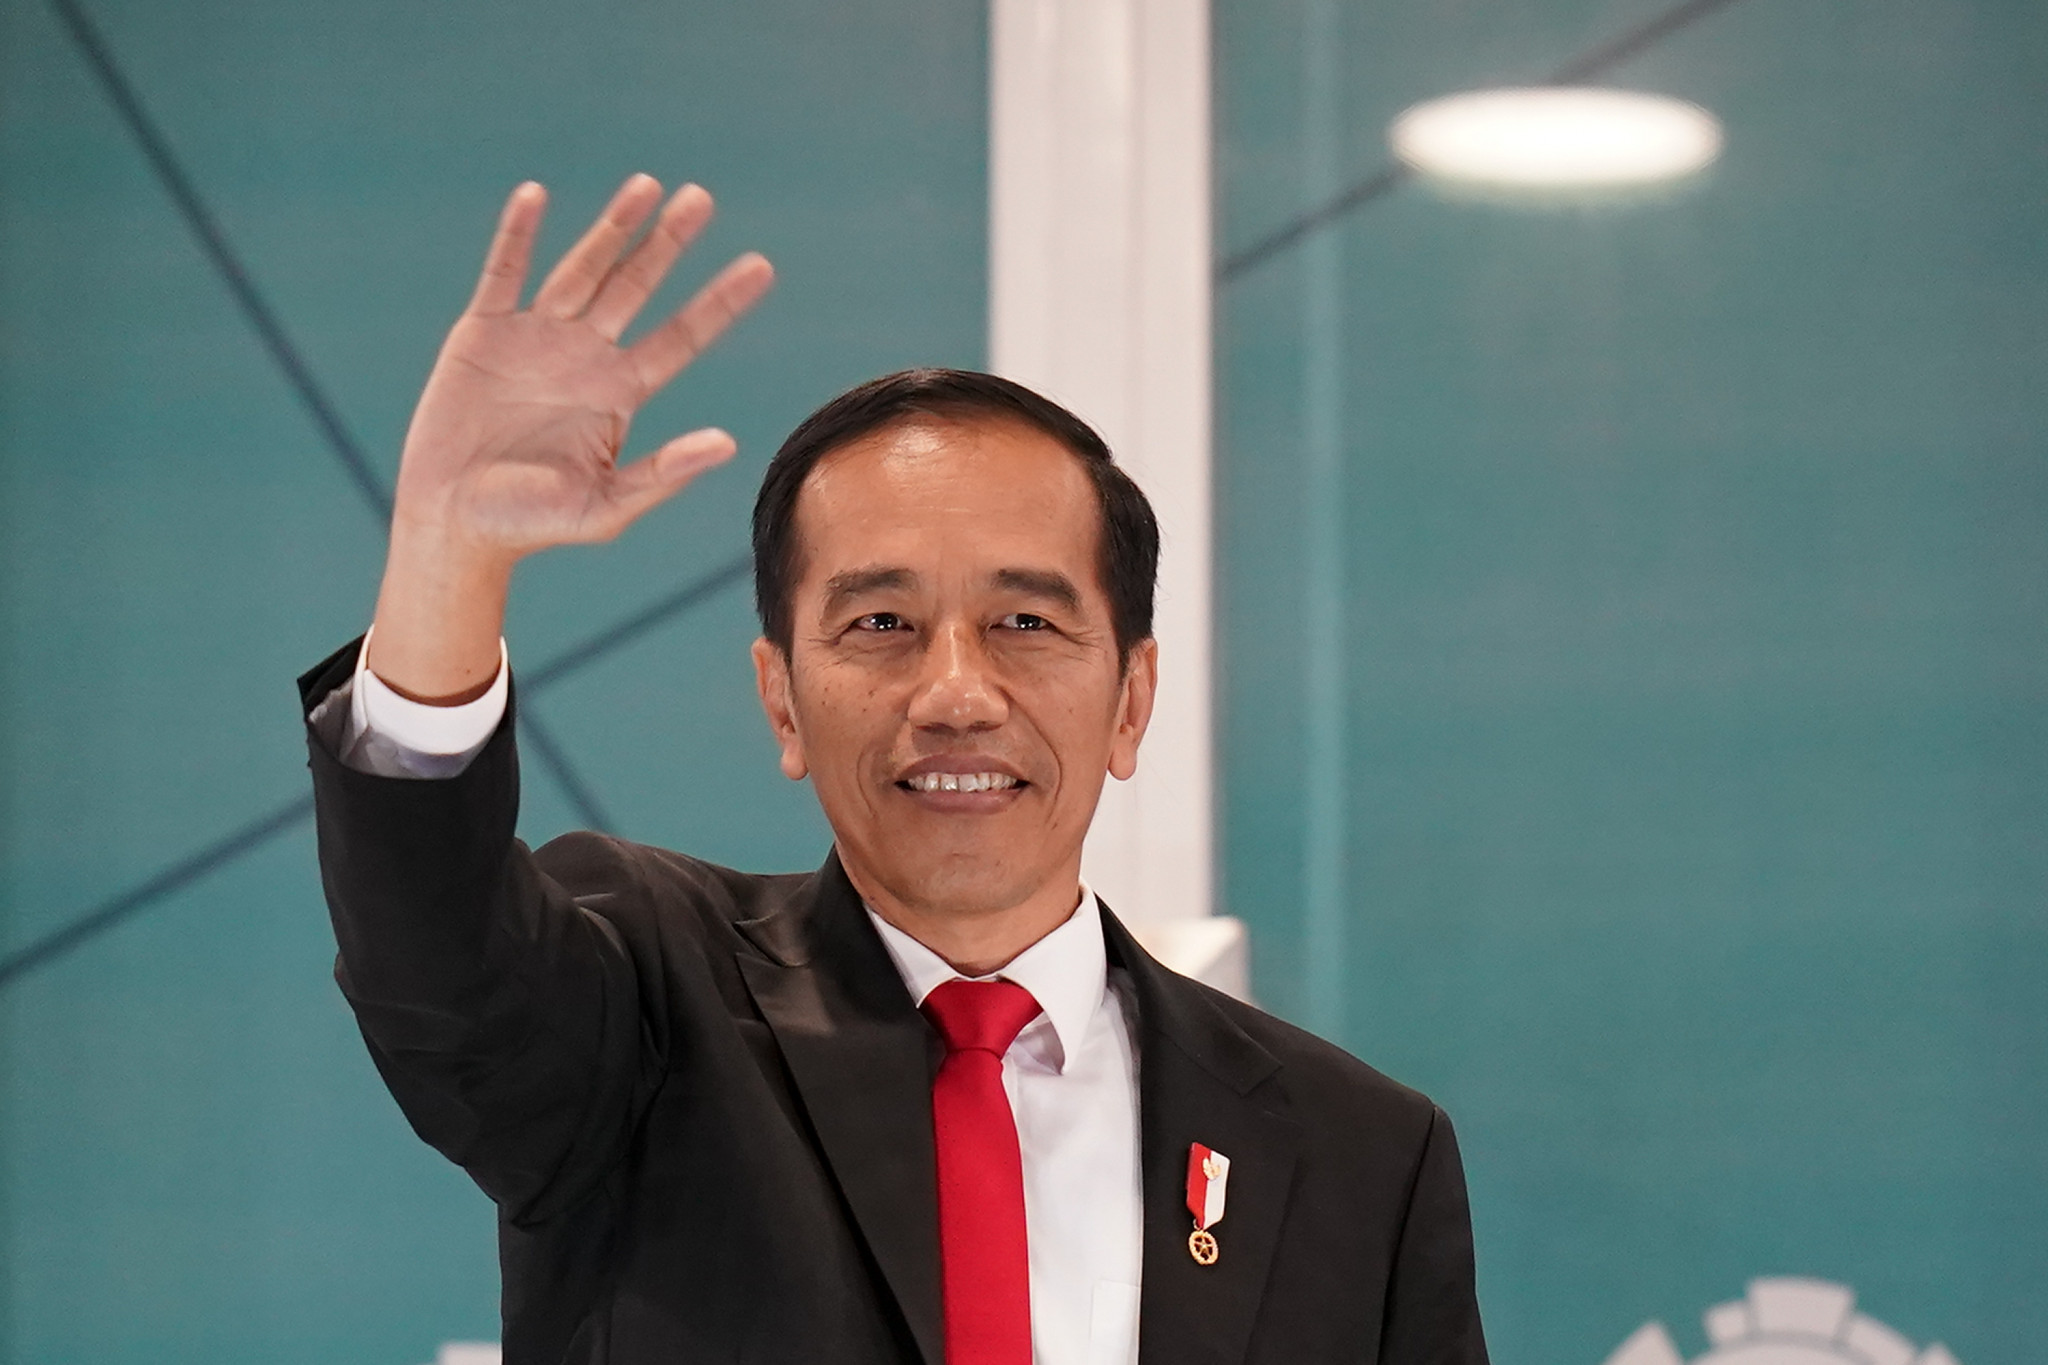 Indonesia submit official letter confirming plan to bid for 2032 Olympic and Paralympic Games